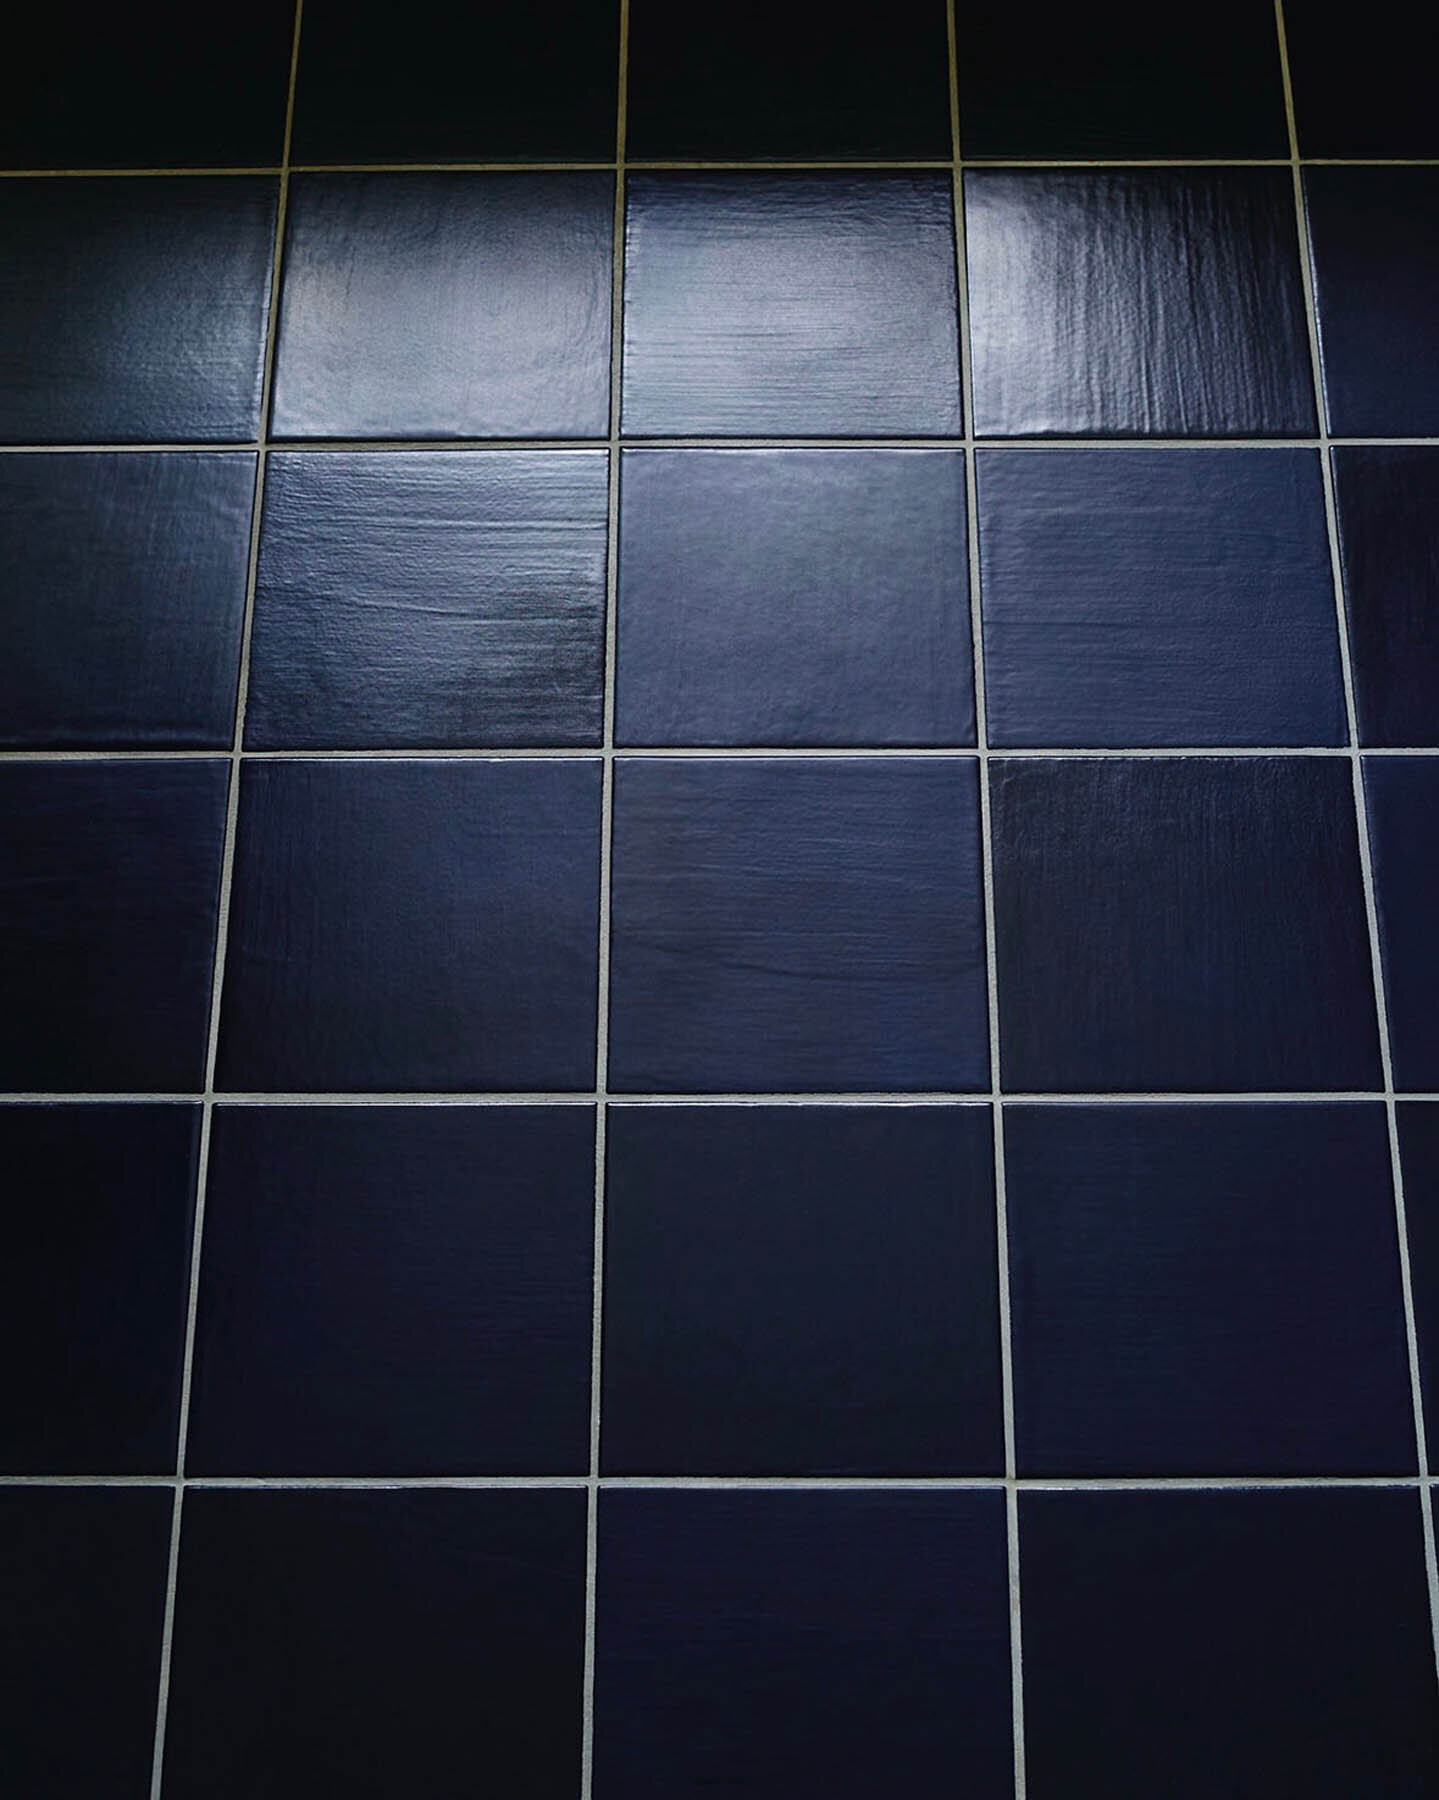 Floor with lava stone tiles in format 15x15x1 cm glazed with 'Tangled Up Matt